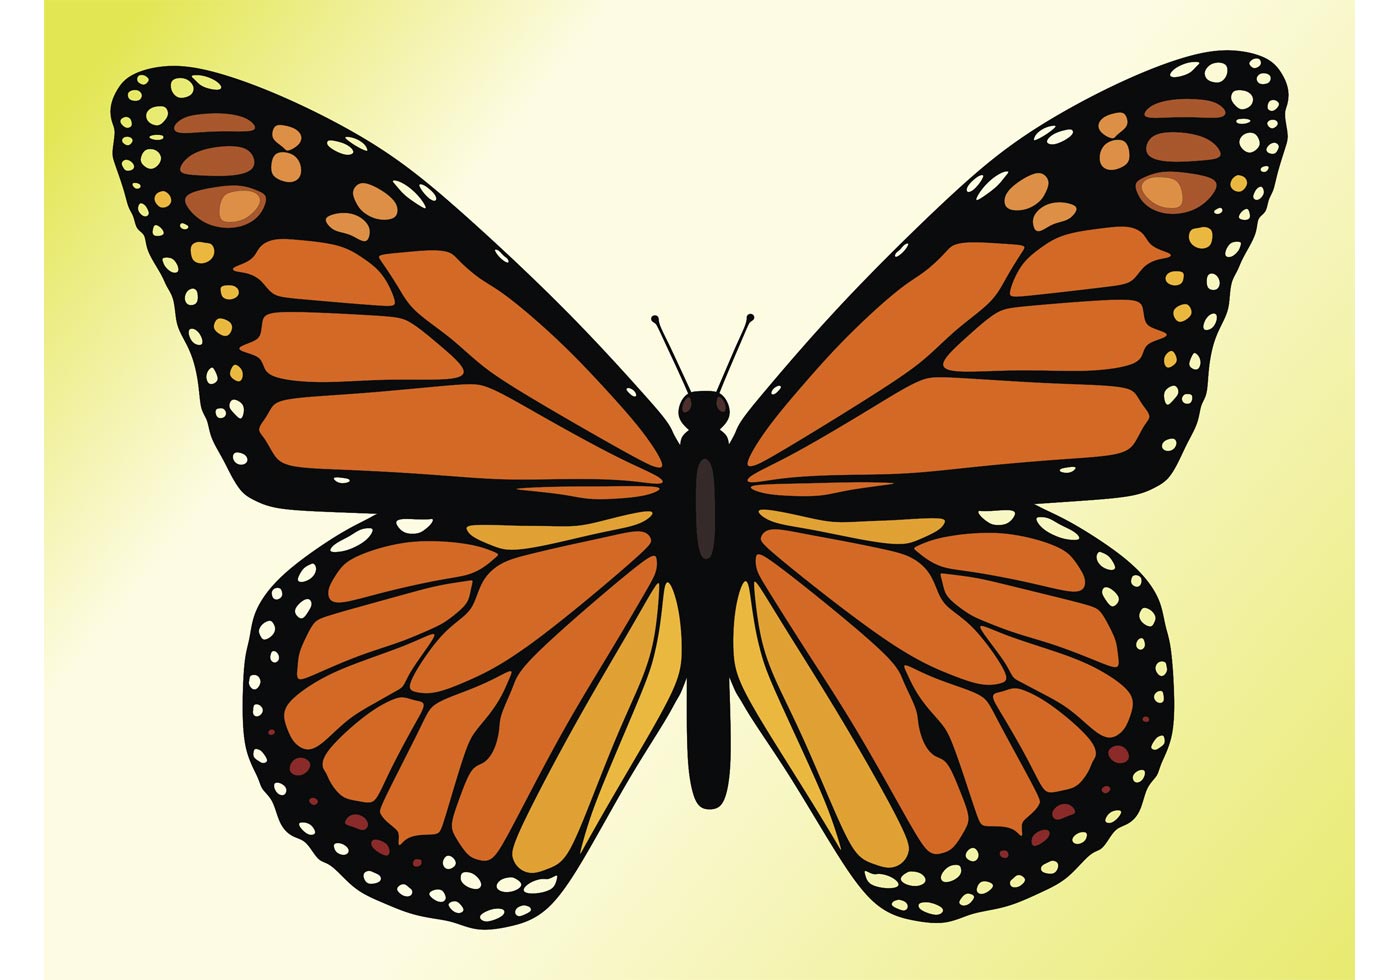 Monarch Butterfly - Download Free Vector Art, Stock ...